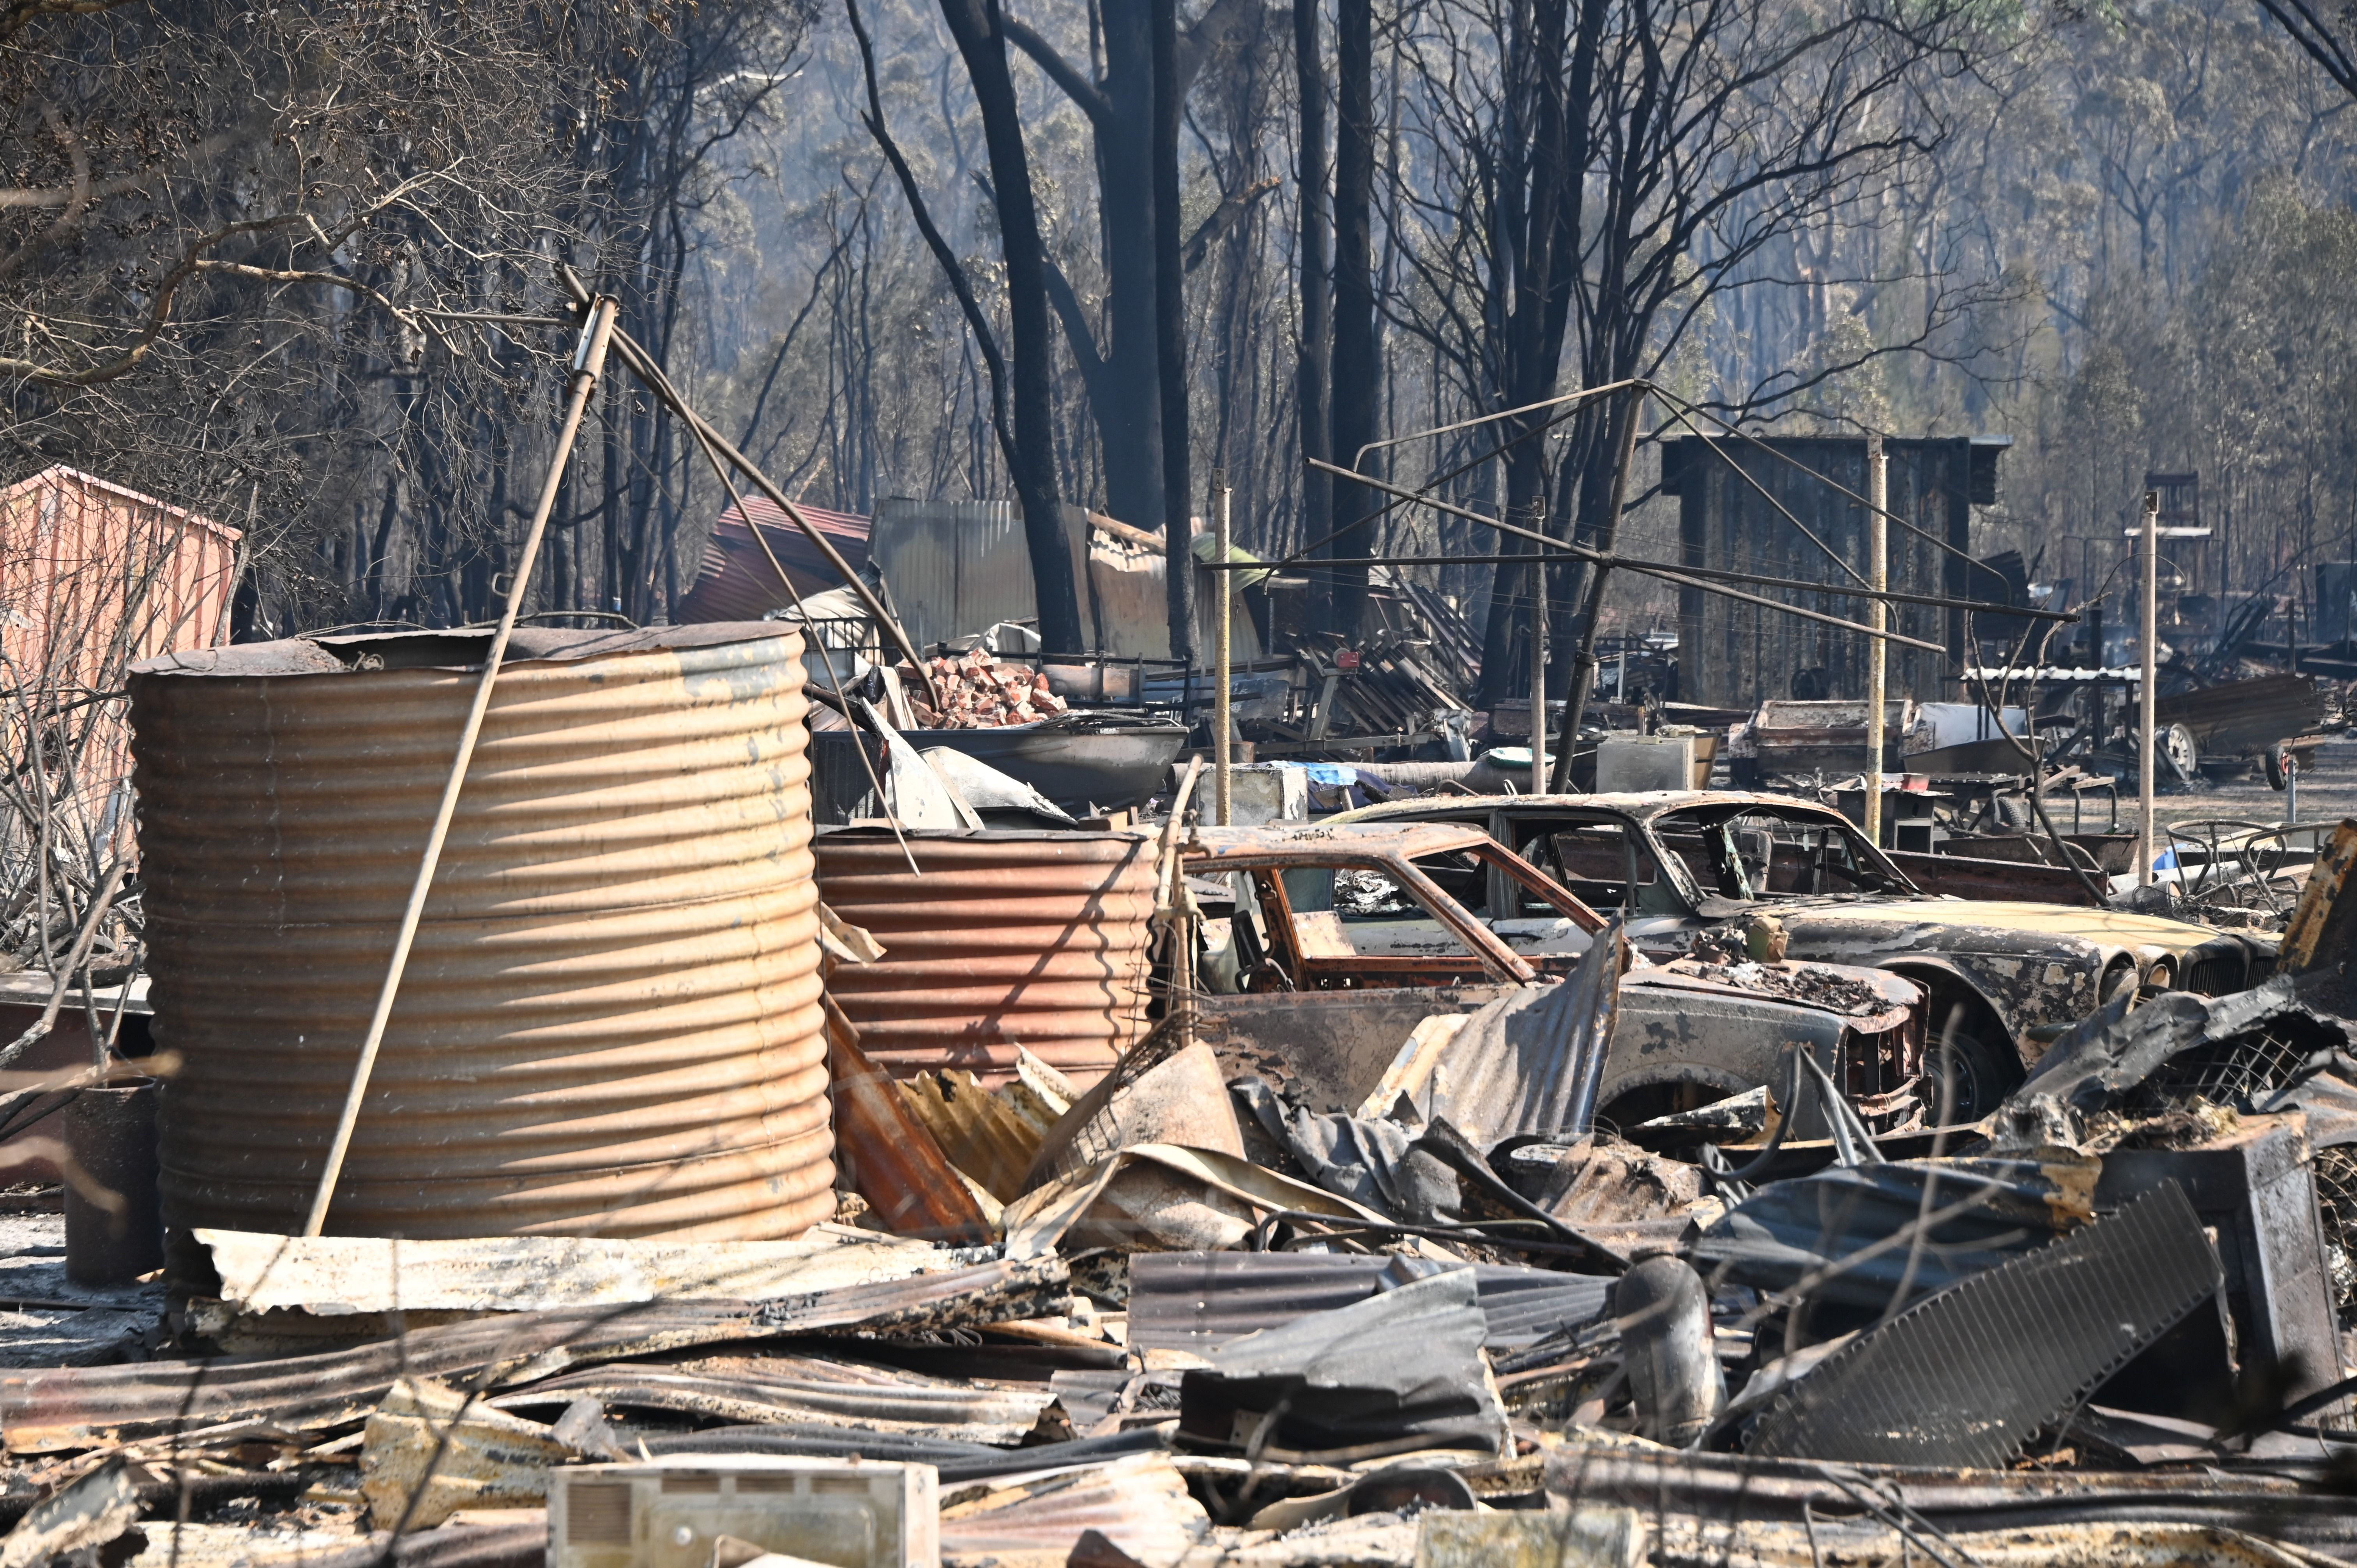 The remains of a house are seen after a bushfire destroyed a property in Old Bar, 350km north of Sydney on November 10